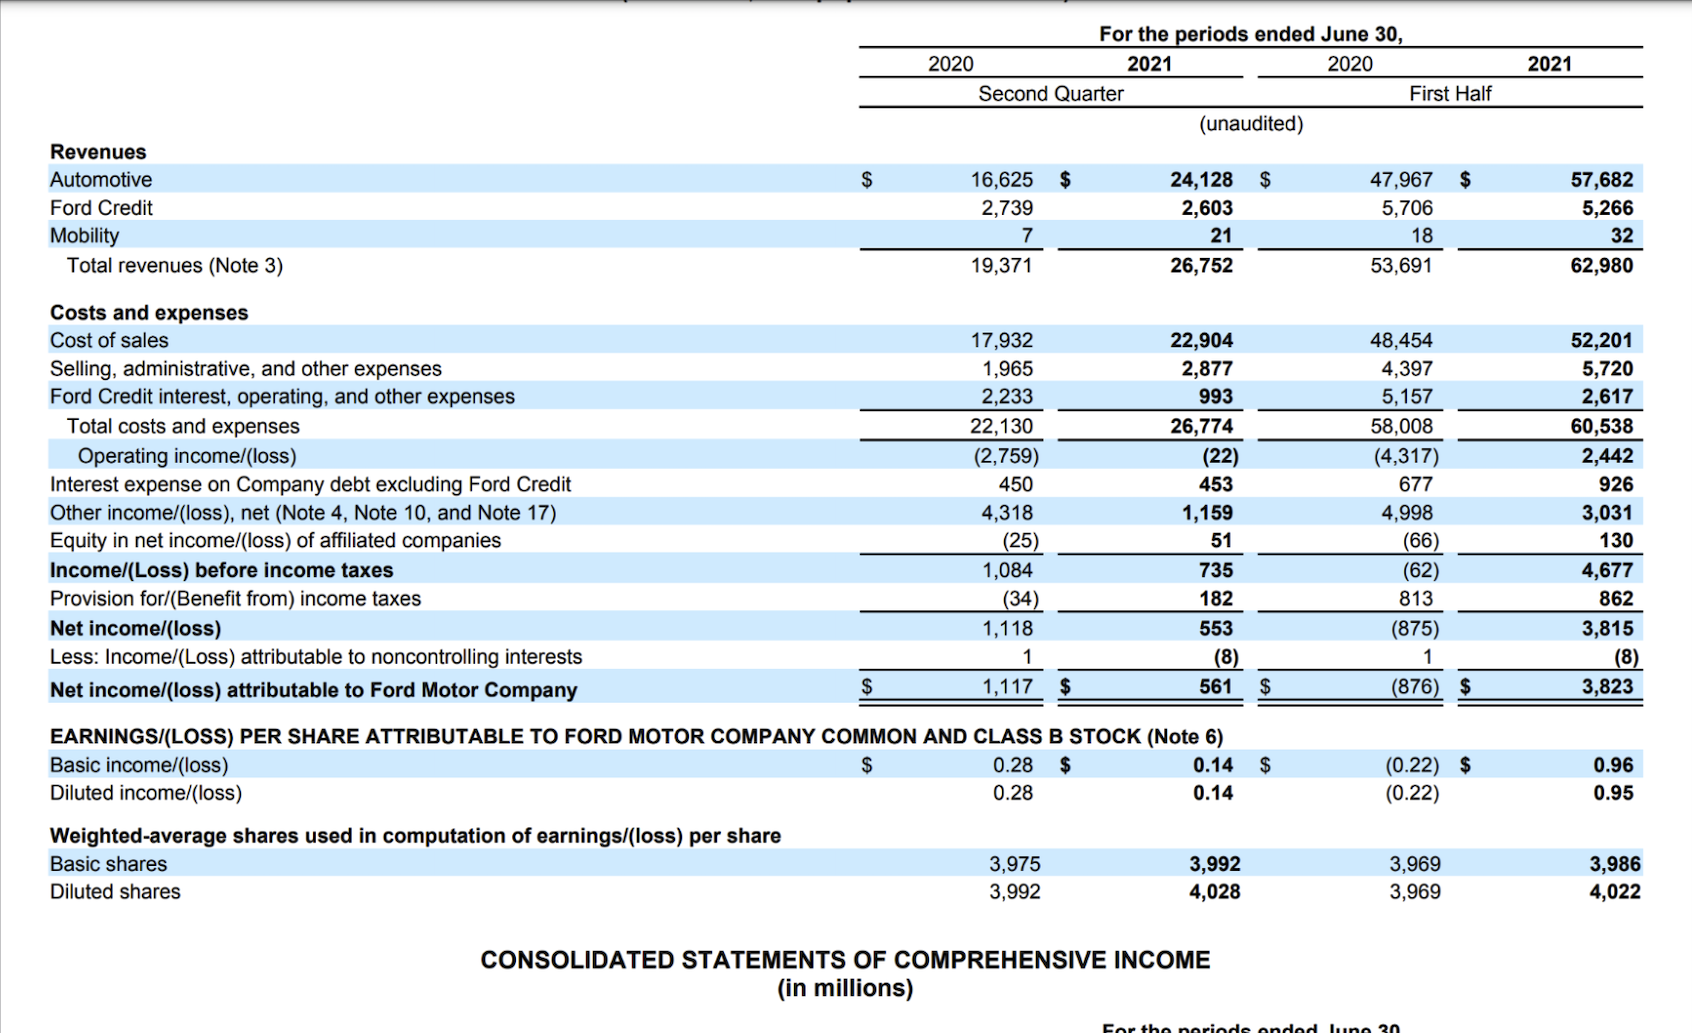 A screenshot showing a 2021 quarterly income statement from Ford.